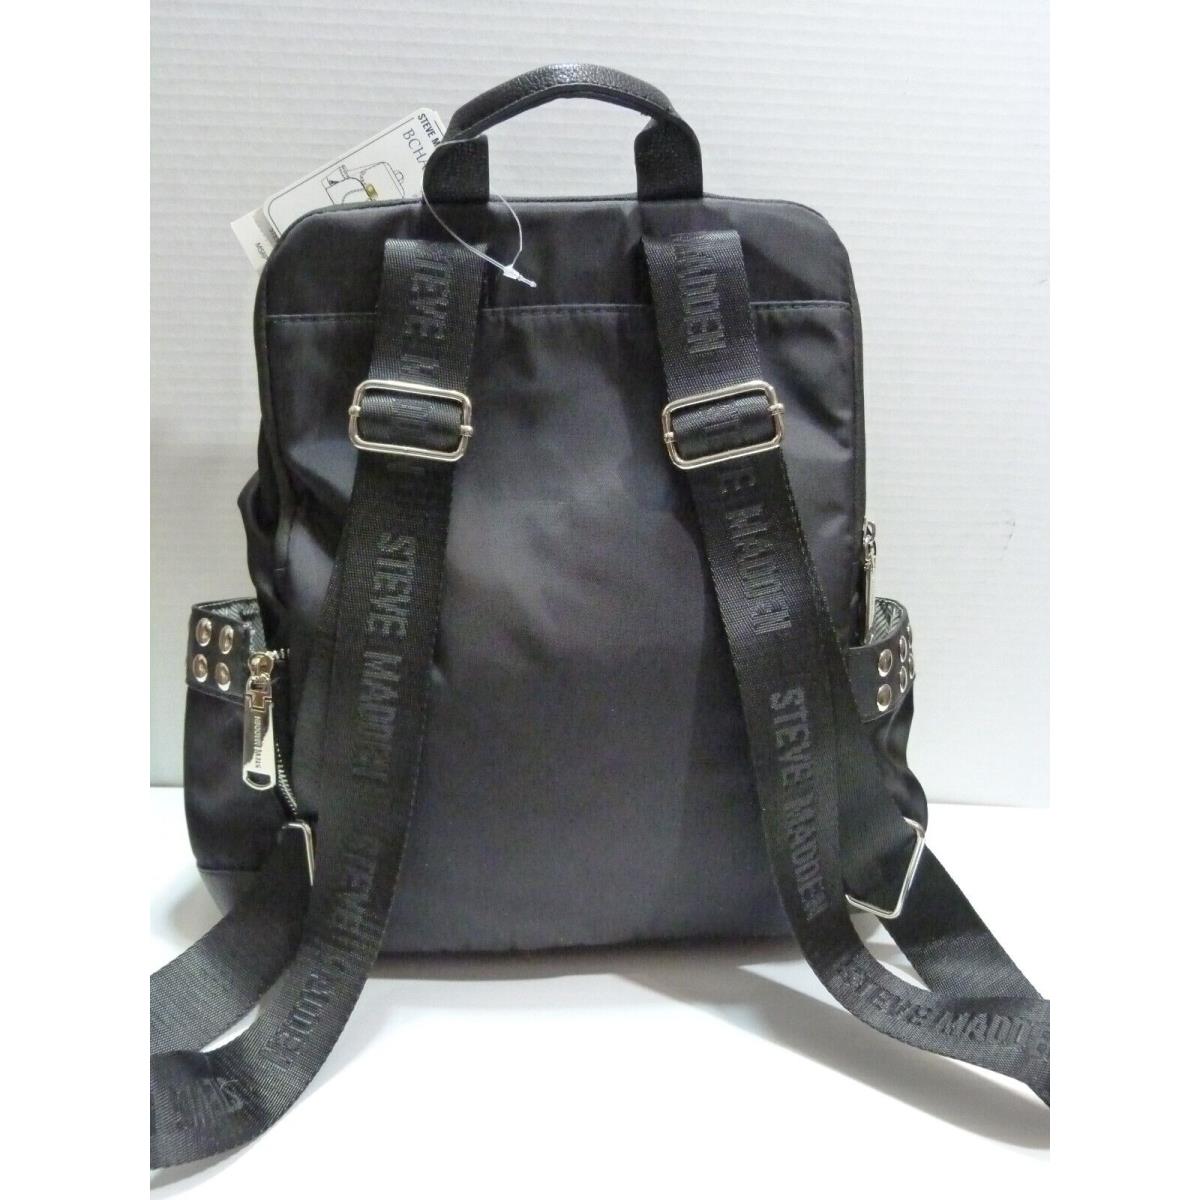 Cool Steve Madden Nylon/city Backpack with Tablet Pocket and Side Pockets